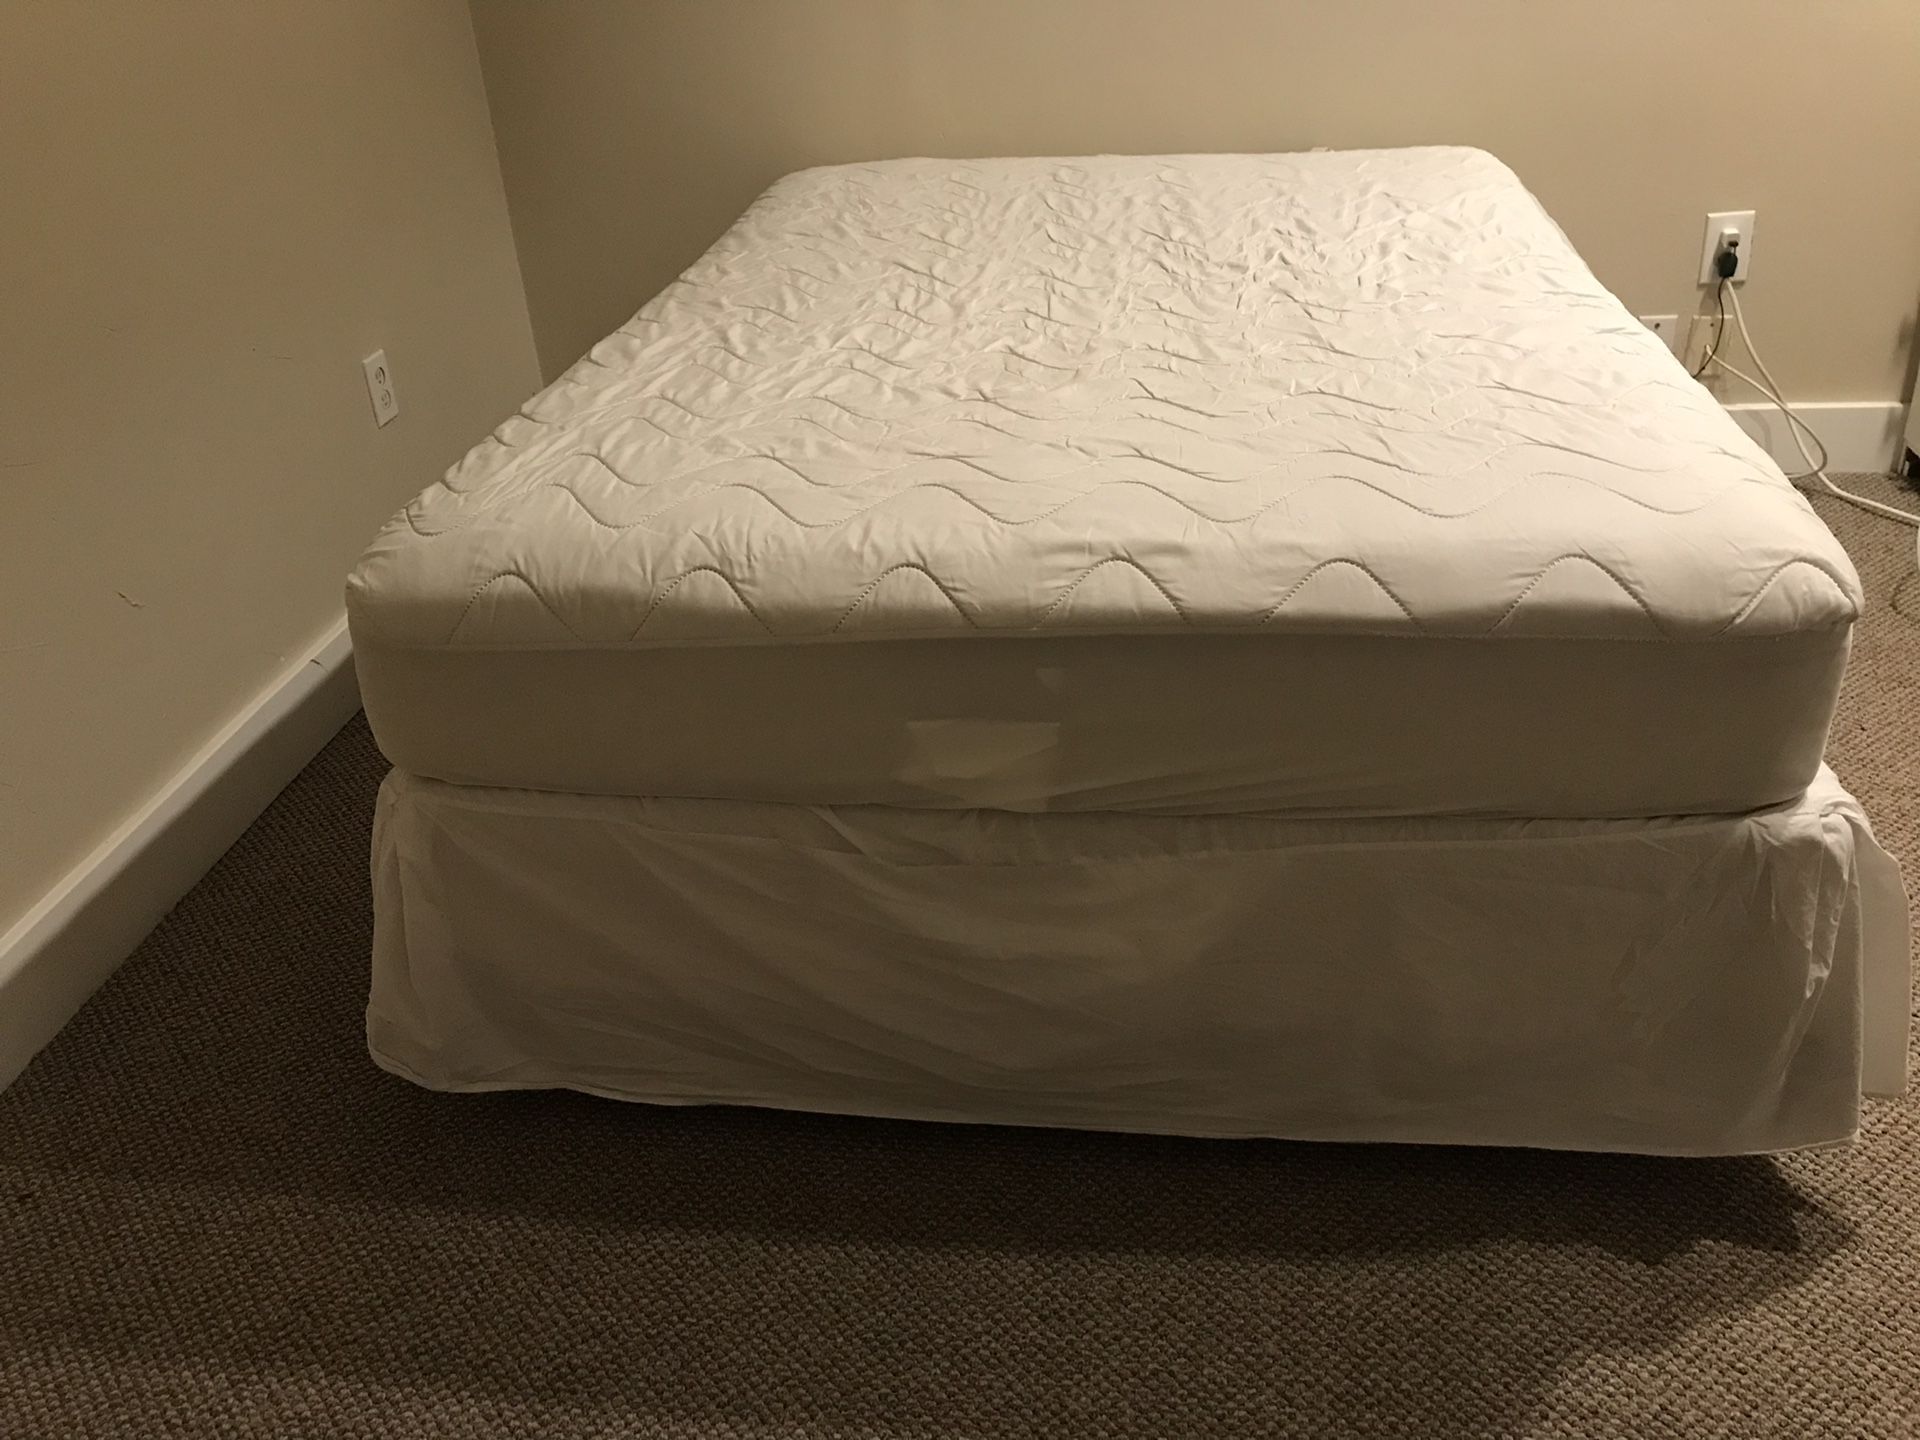 Double Bed, box spring, adjustable queen/double collapsible metal frame. Room for underbed storage!